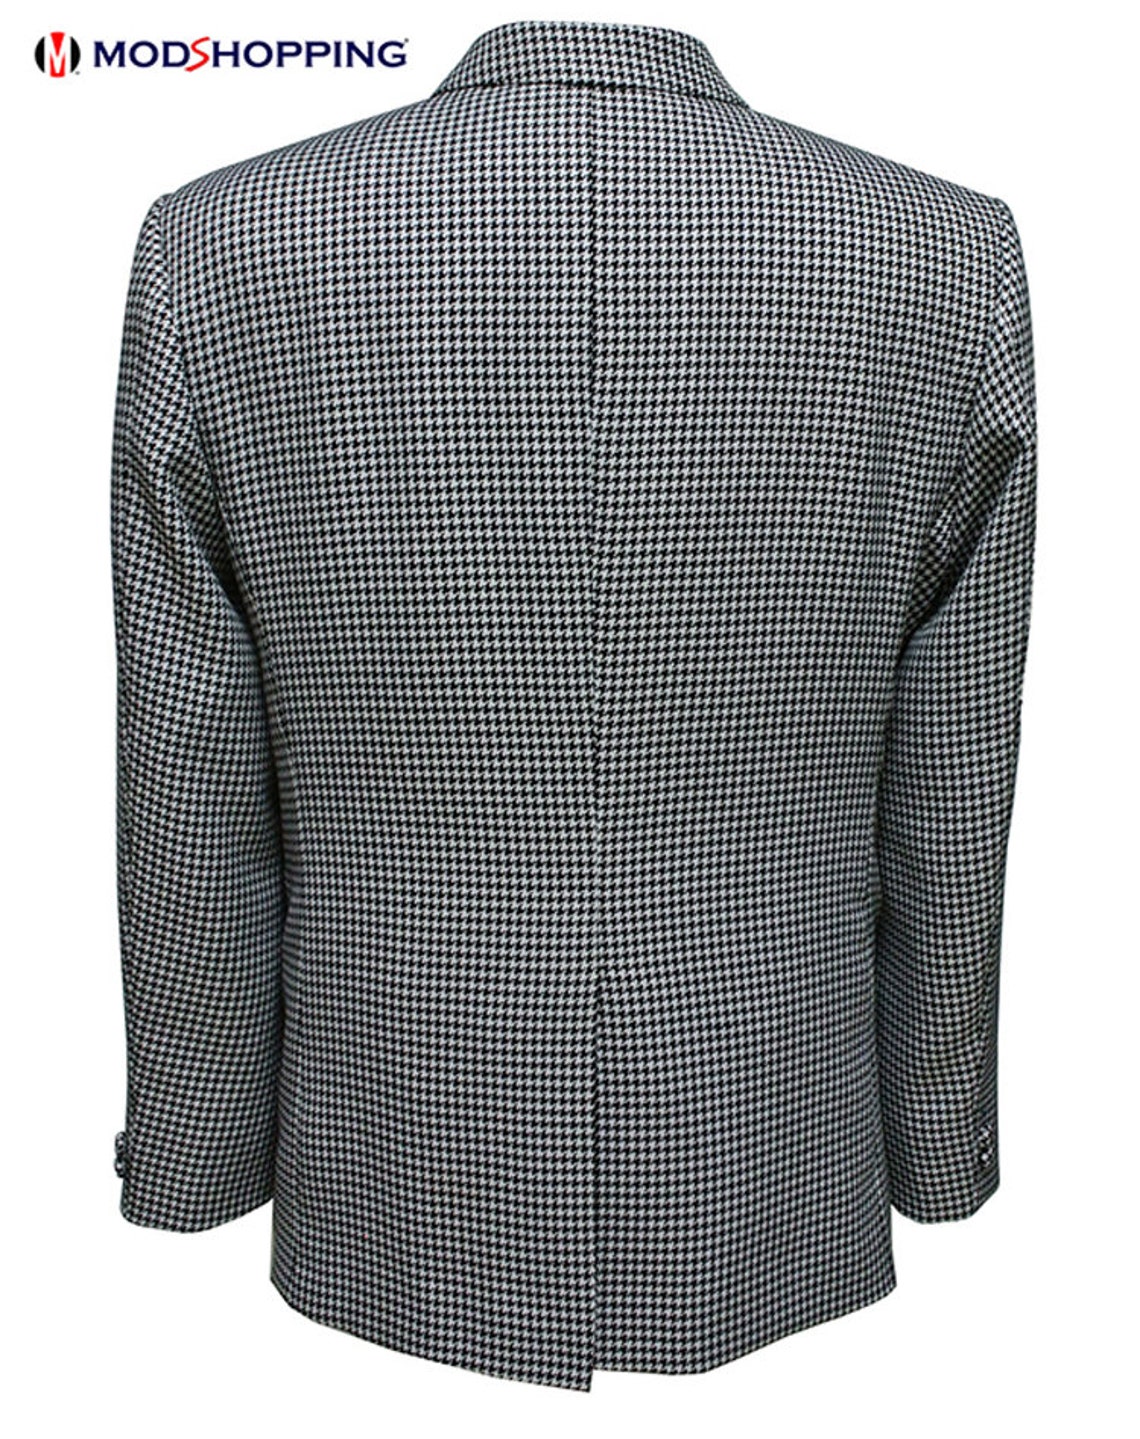 Dogtooth jacket big dogtooth check jacket for man | Etsy